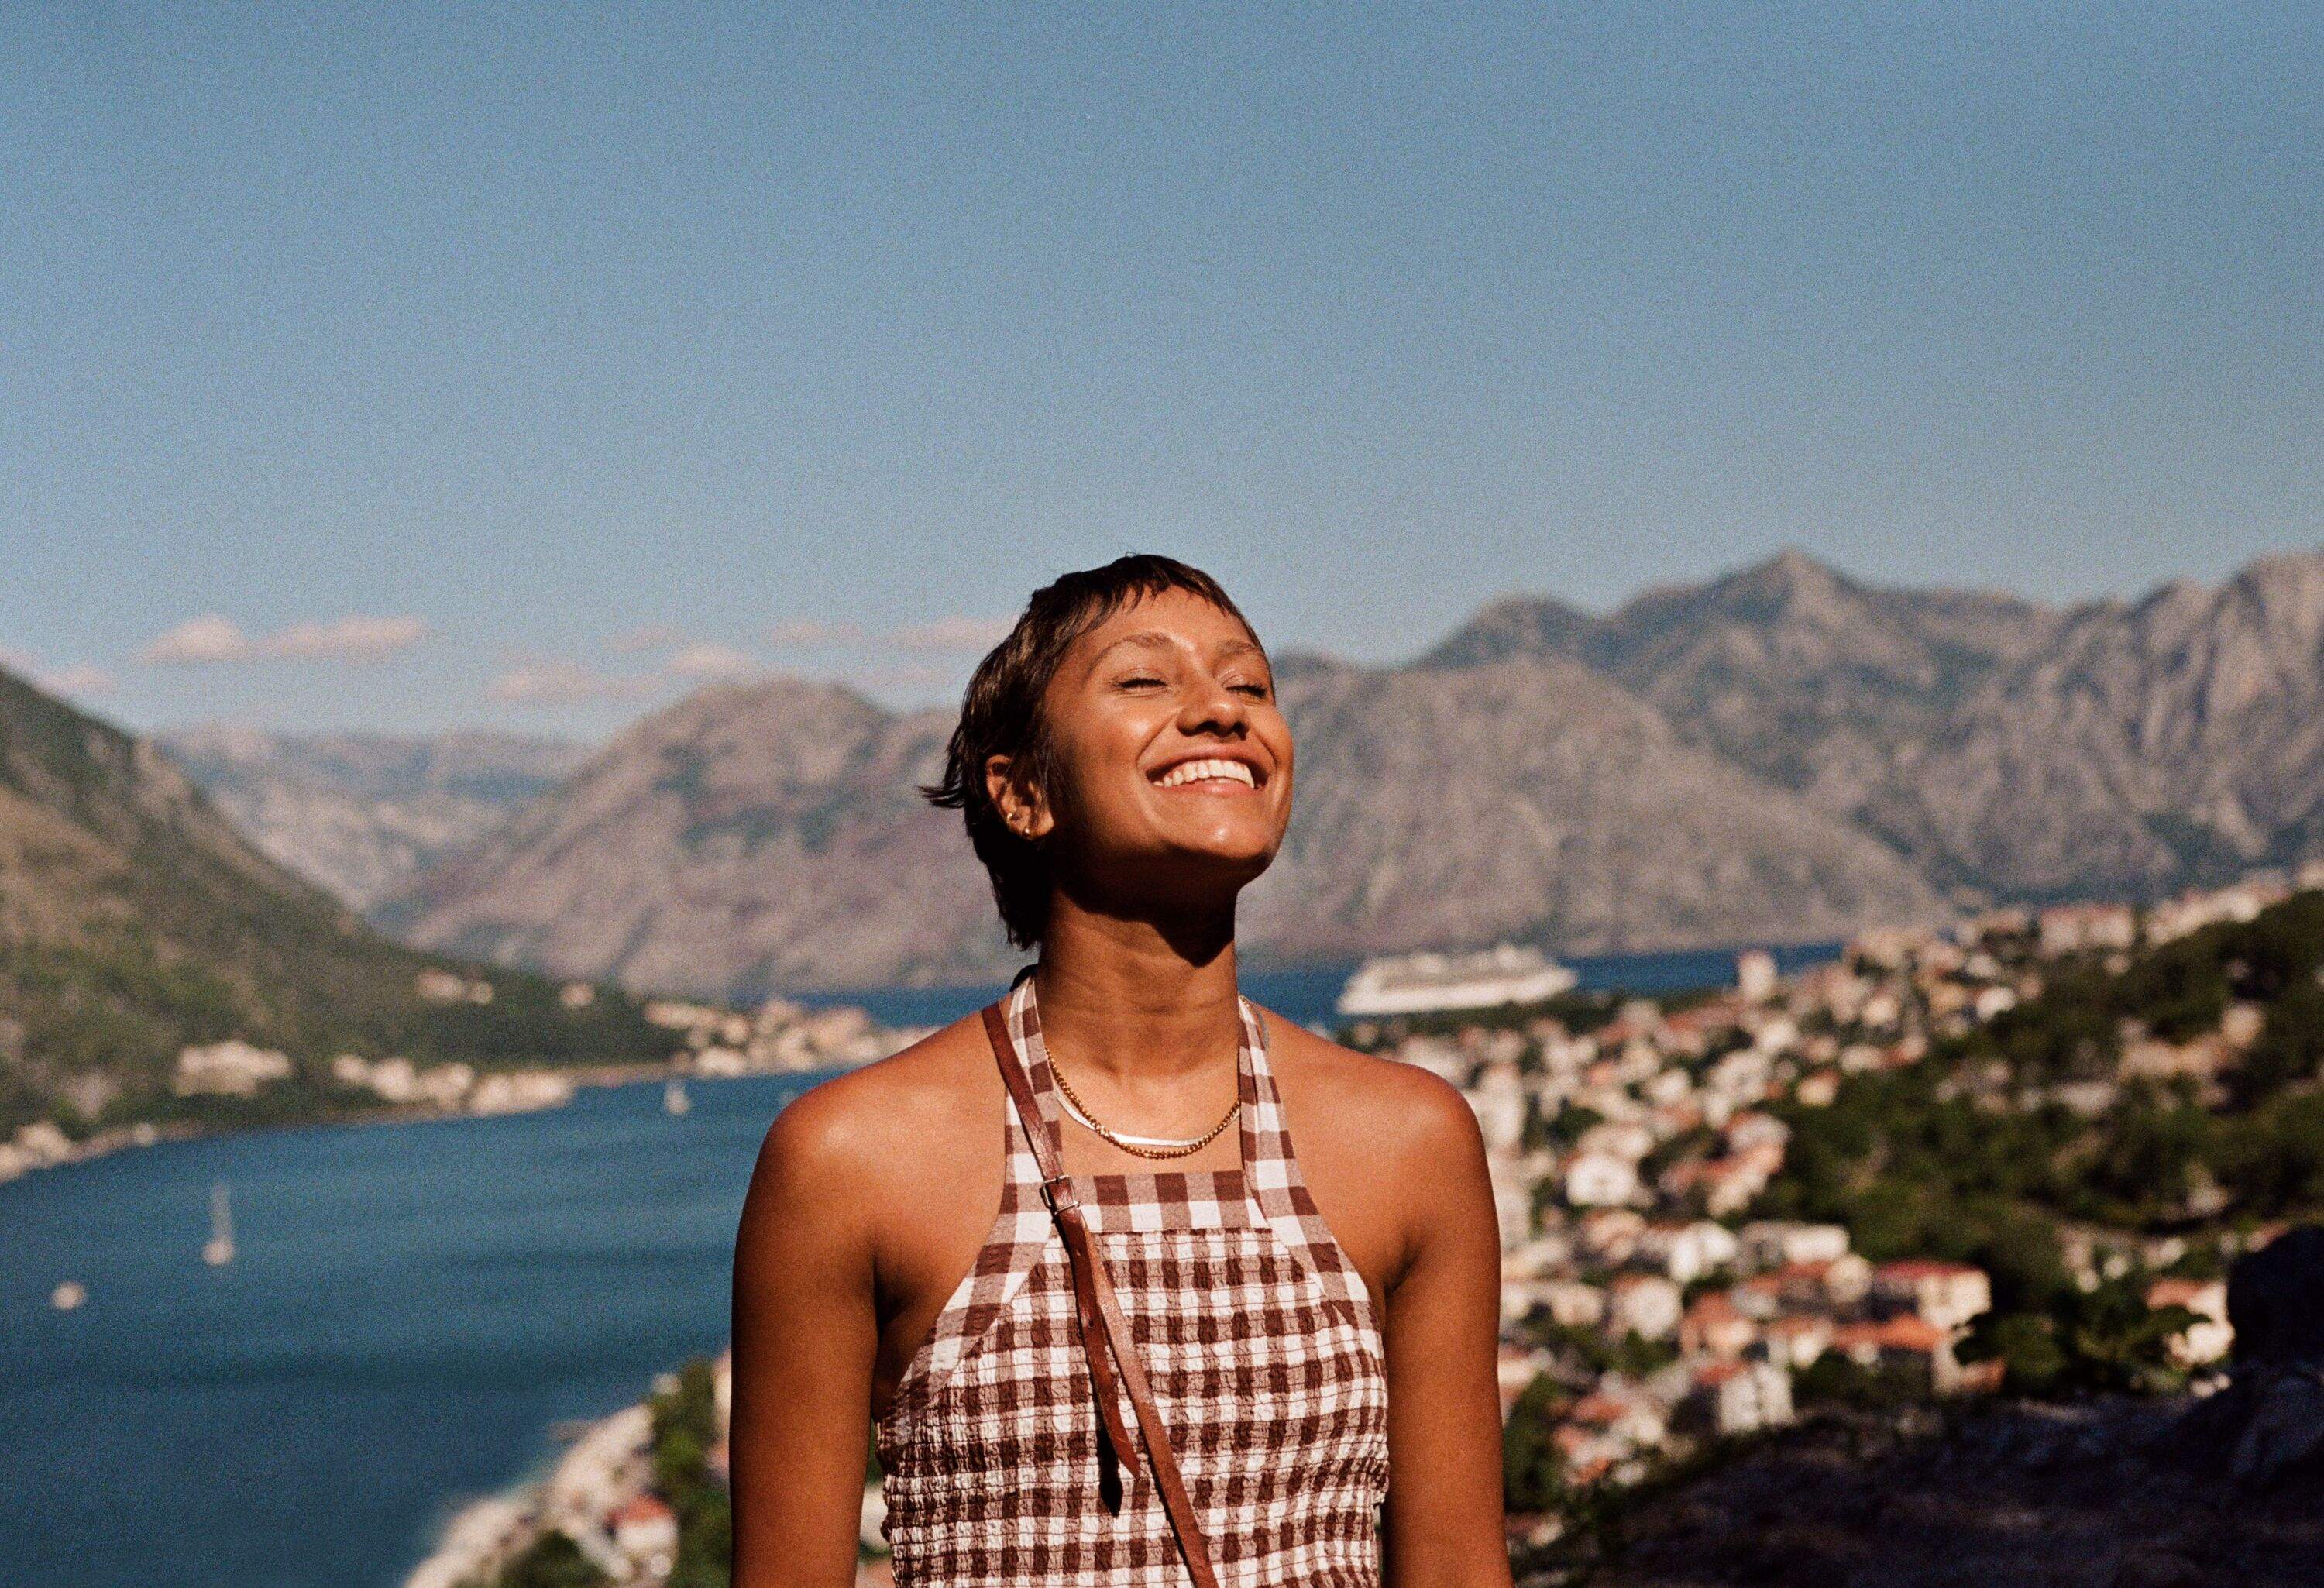 Smiling young woman enjoying sunlight against mountain range and sea during vacation